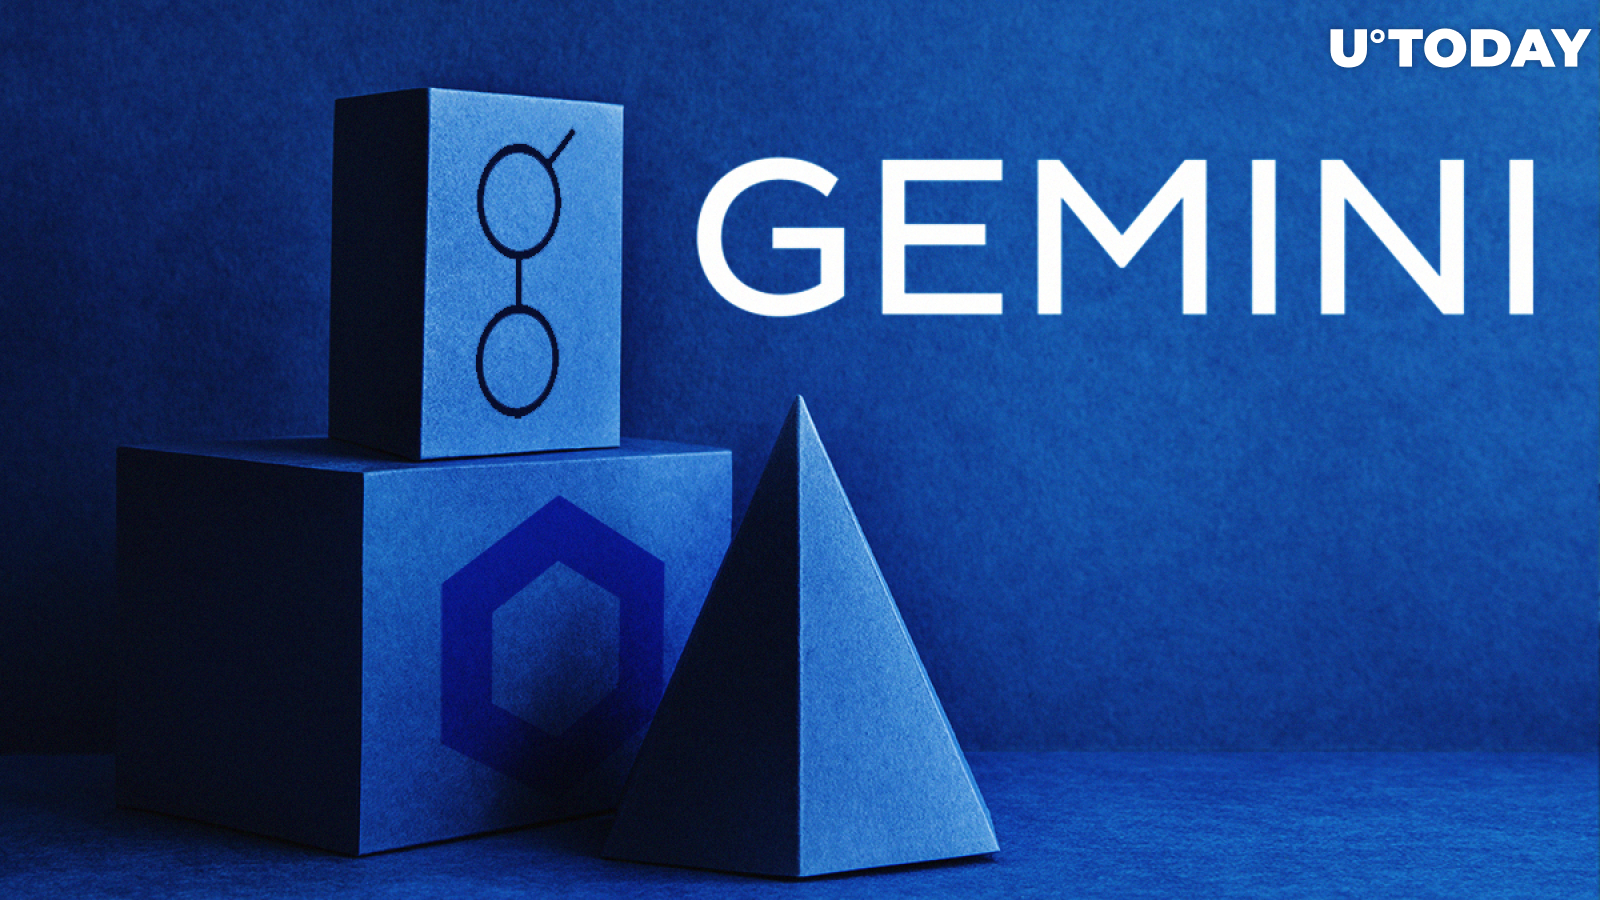 Chainlink, Golem and Three Other Tokens Added to Gemini Custody